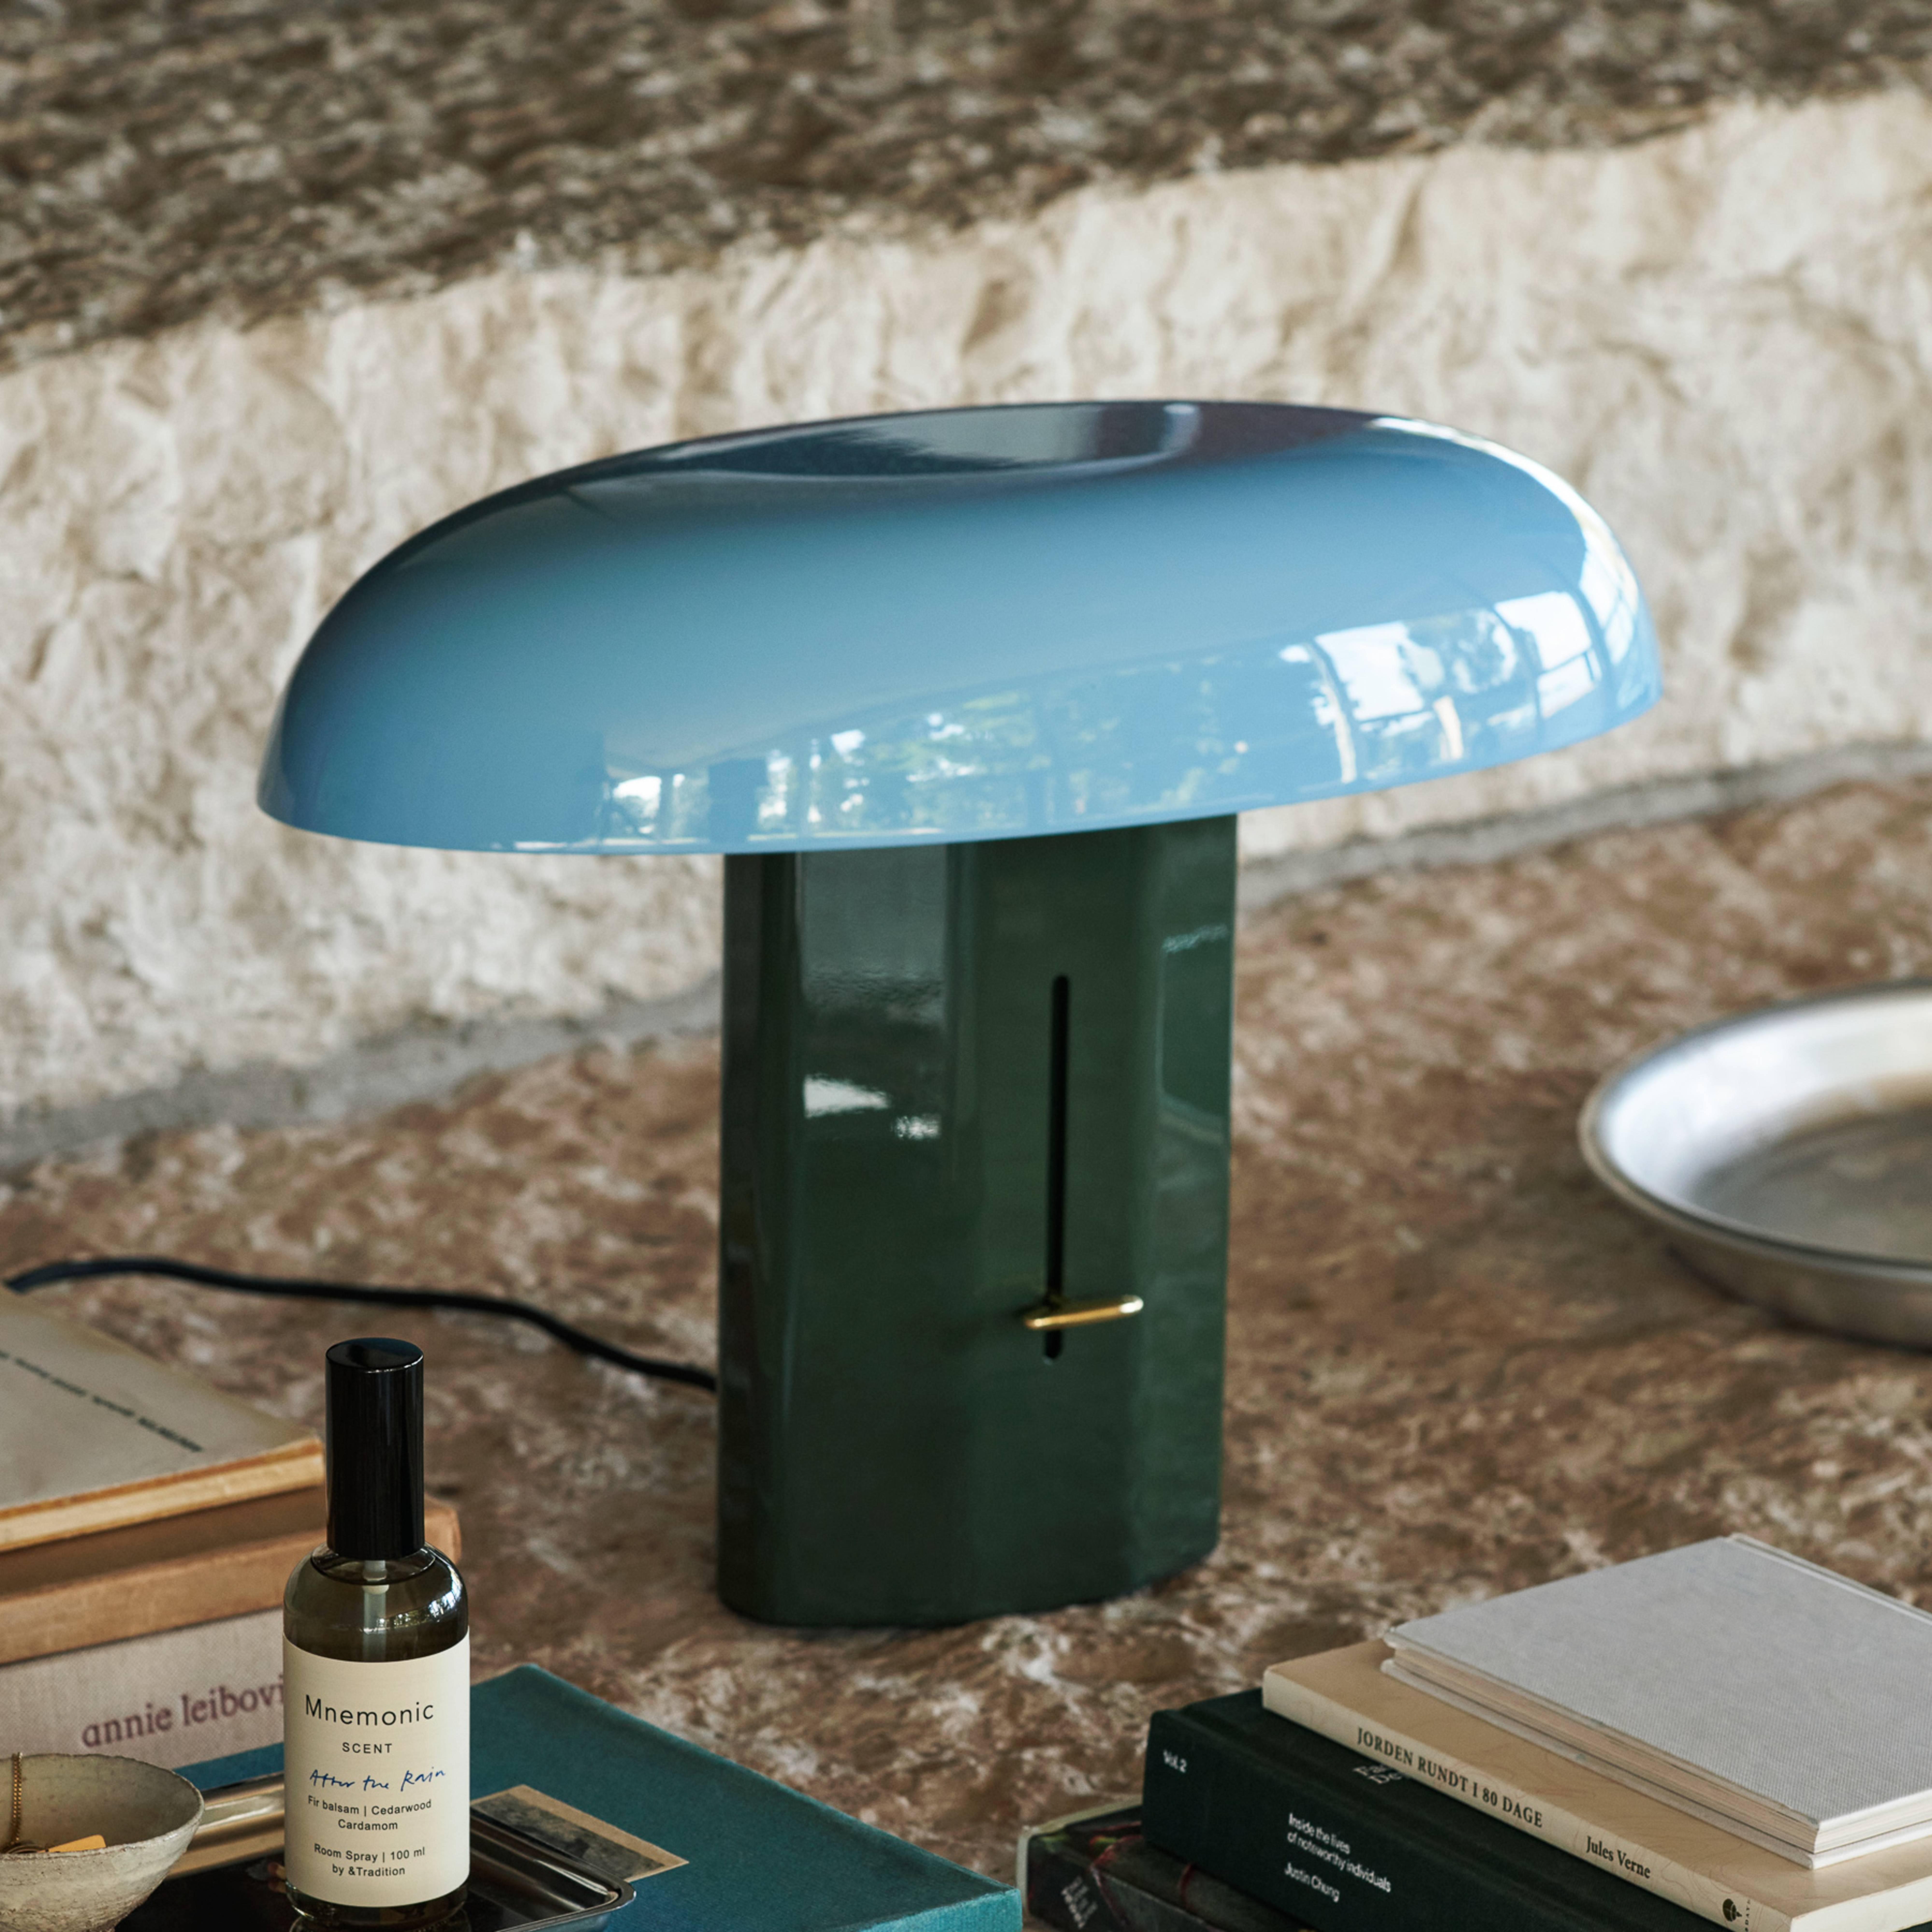 &TRADITION Montera JH42 table lamp, forest green/sky blue